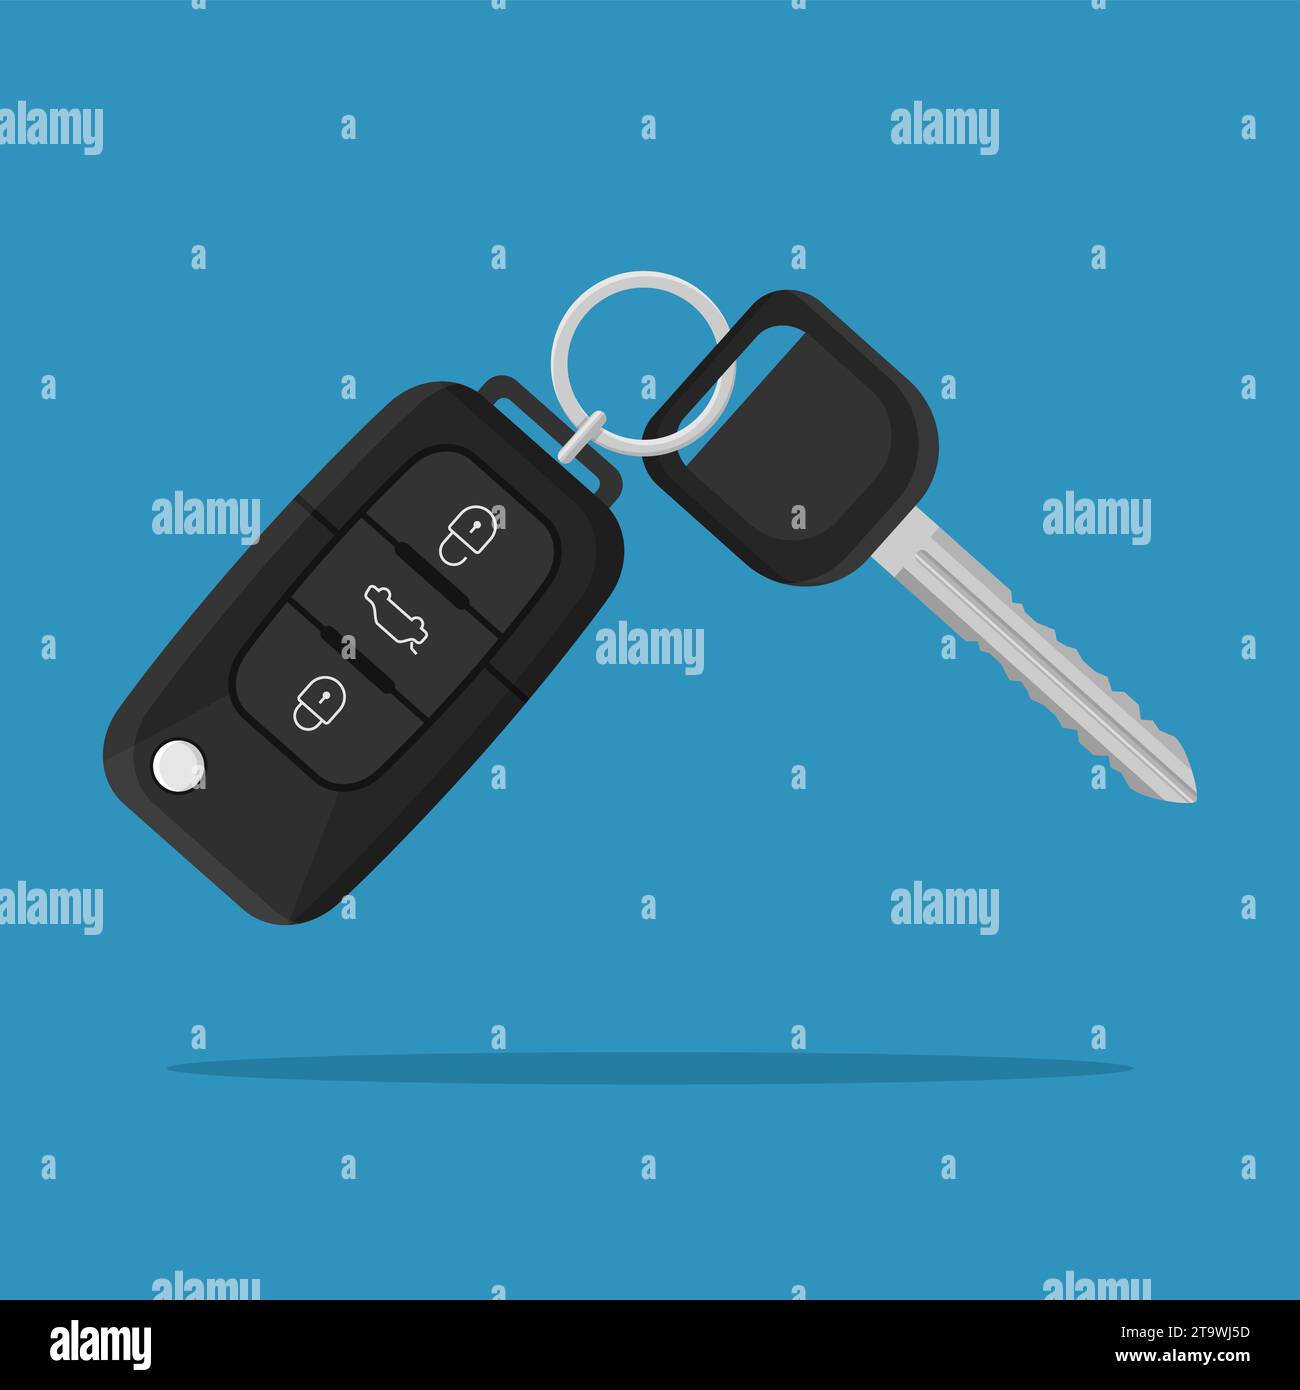 Car remote key isolated on white background. Electronic car key and alarm system. Auto lock security key. Stock Vector